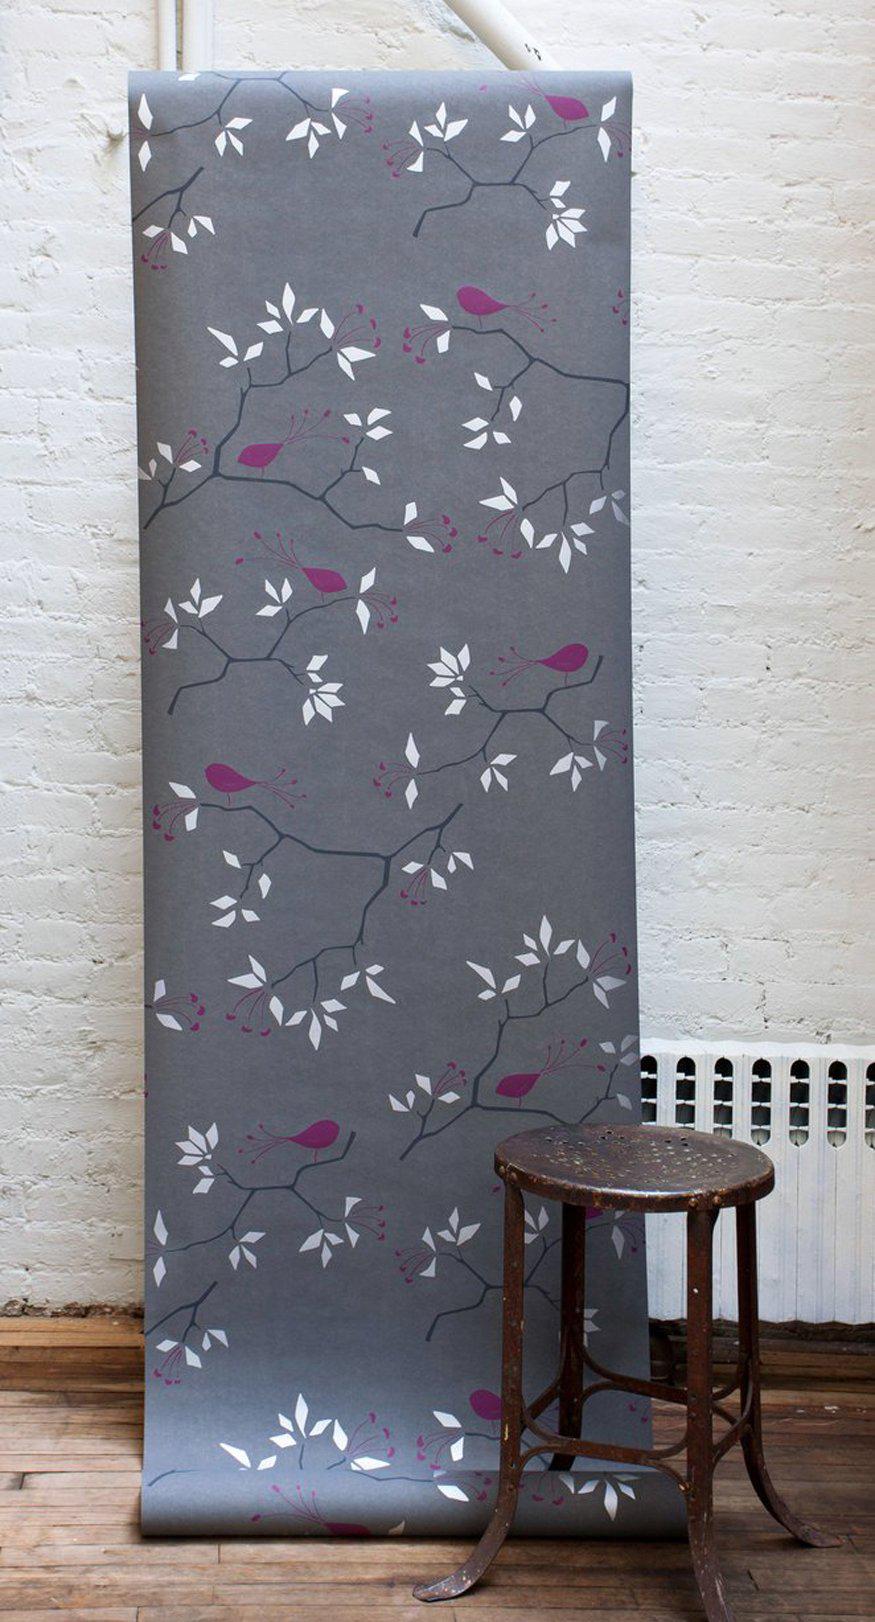 American Geobird Screen Printed Wallpaper in Metallic Silver, and Plum on Graphite For Sale